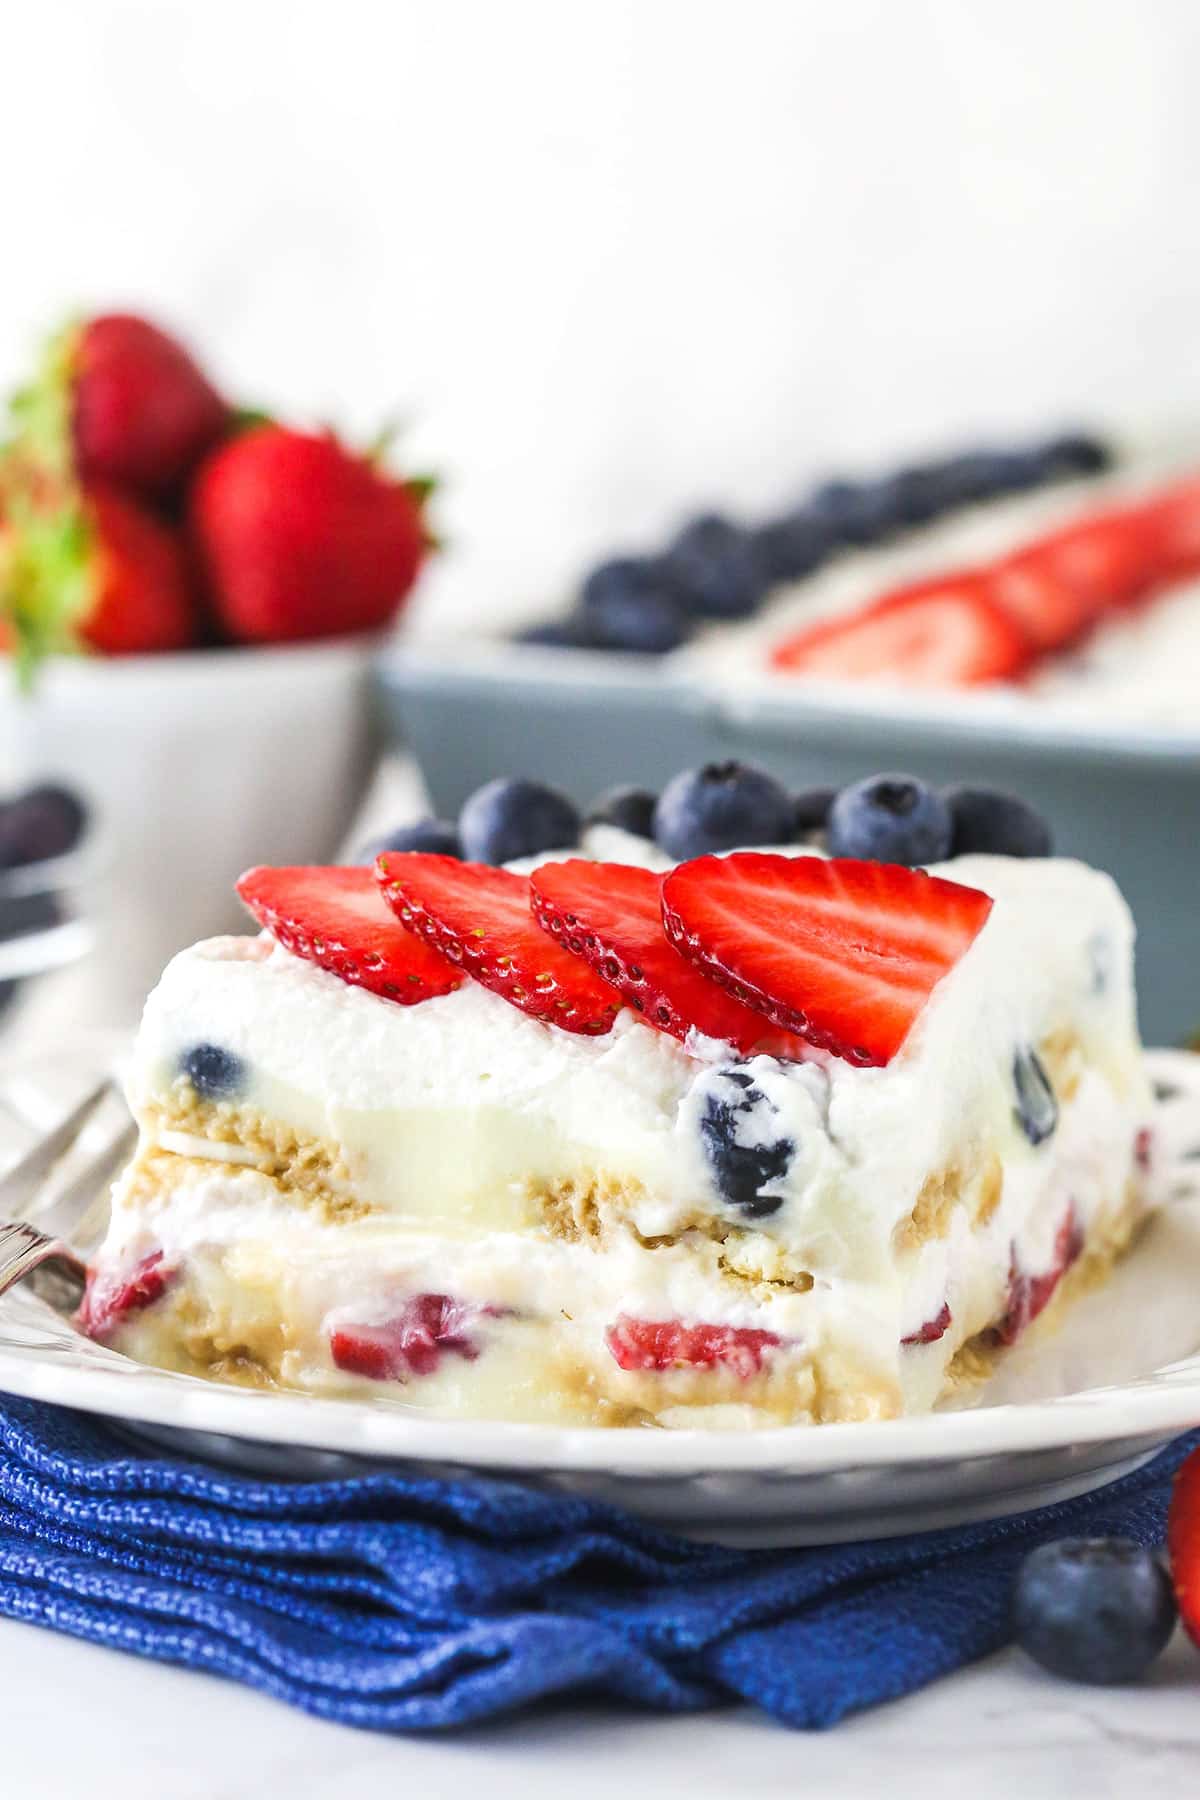 slice of berry icebox cake on white plate with blue napkin underneath and berries in the background